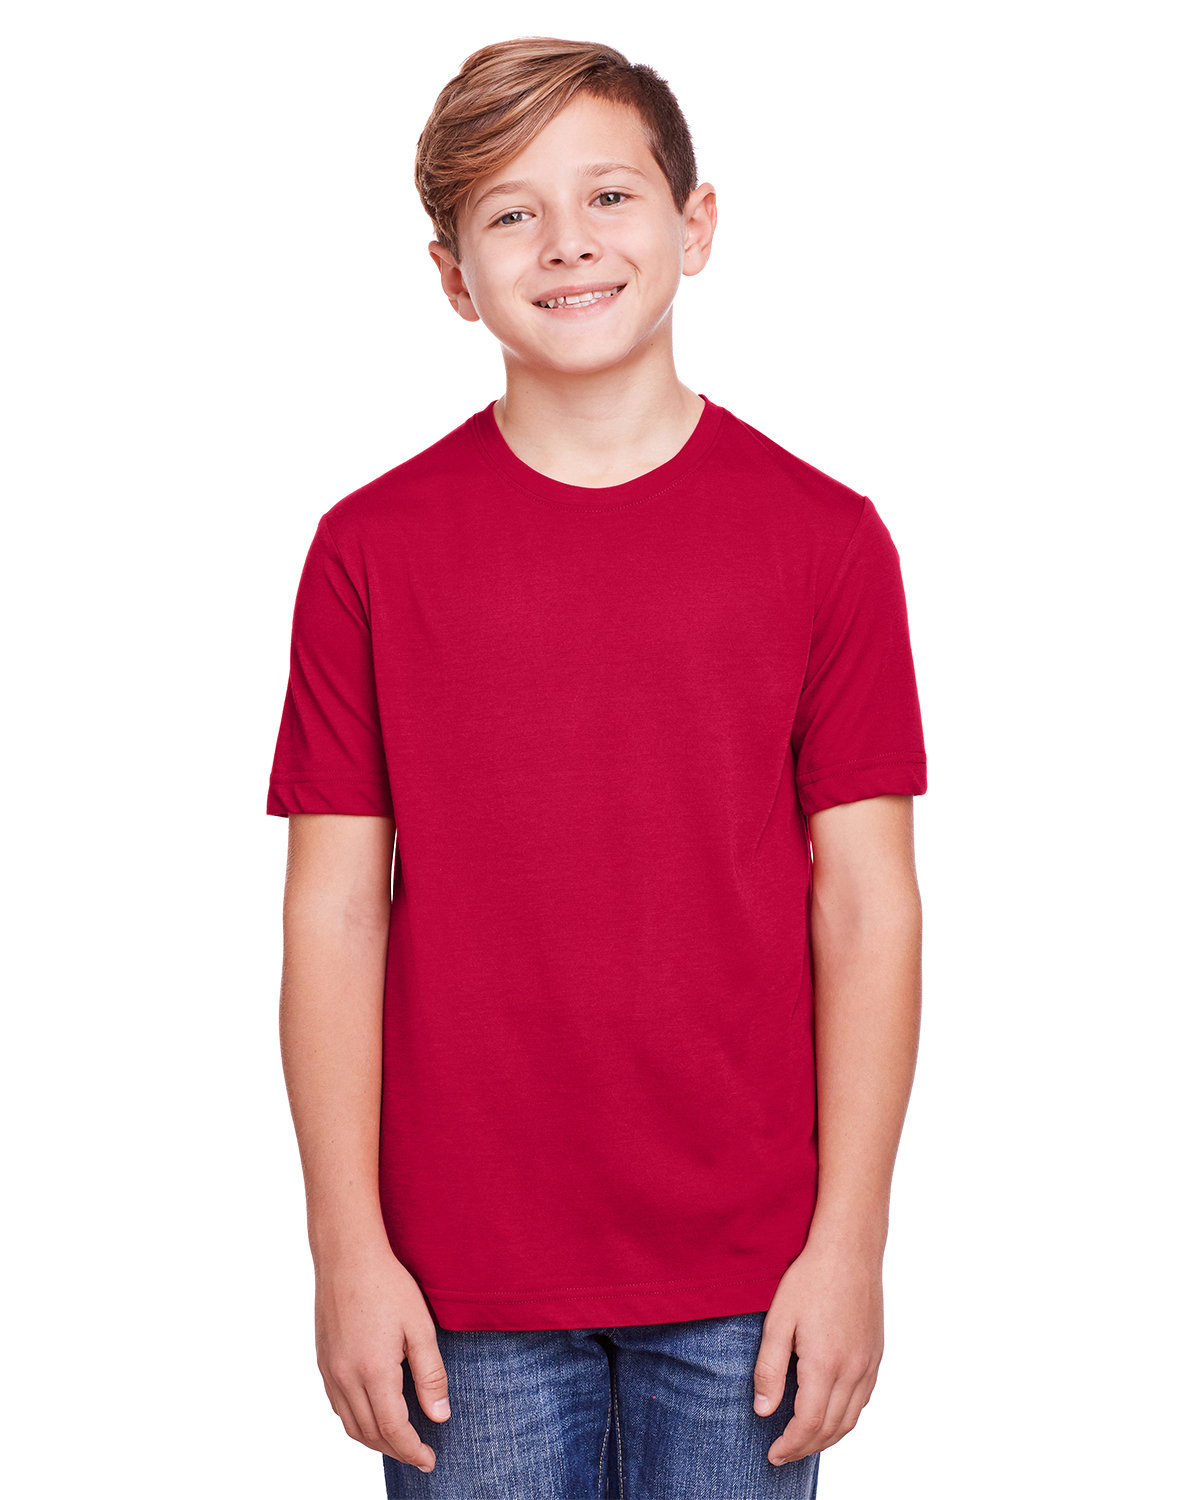 Core 365 Youth Fusion ChromaSoft Performance T-Shirt CLASSIC RED 